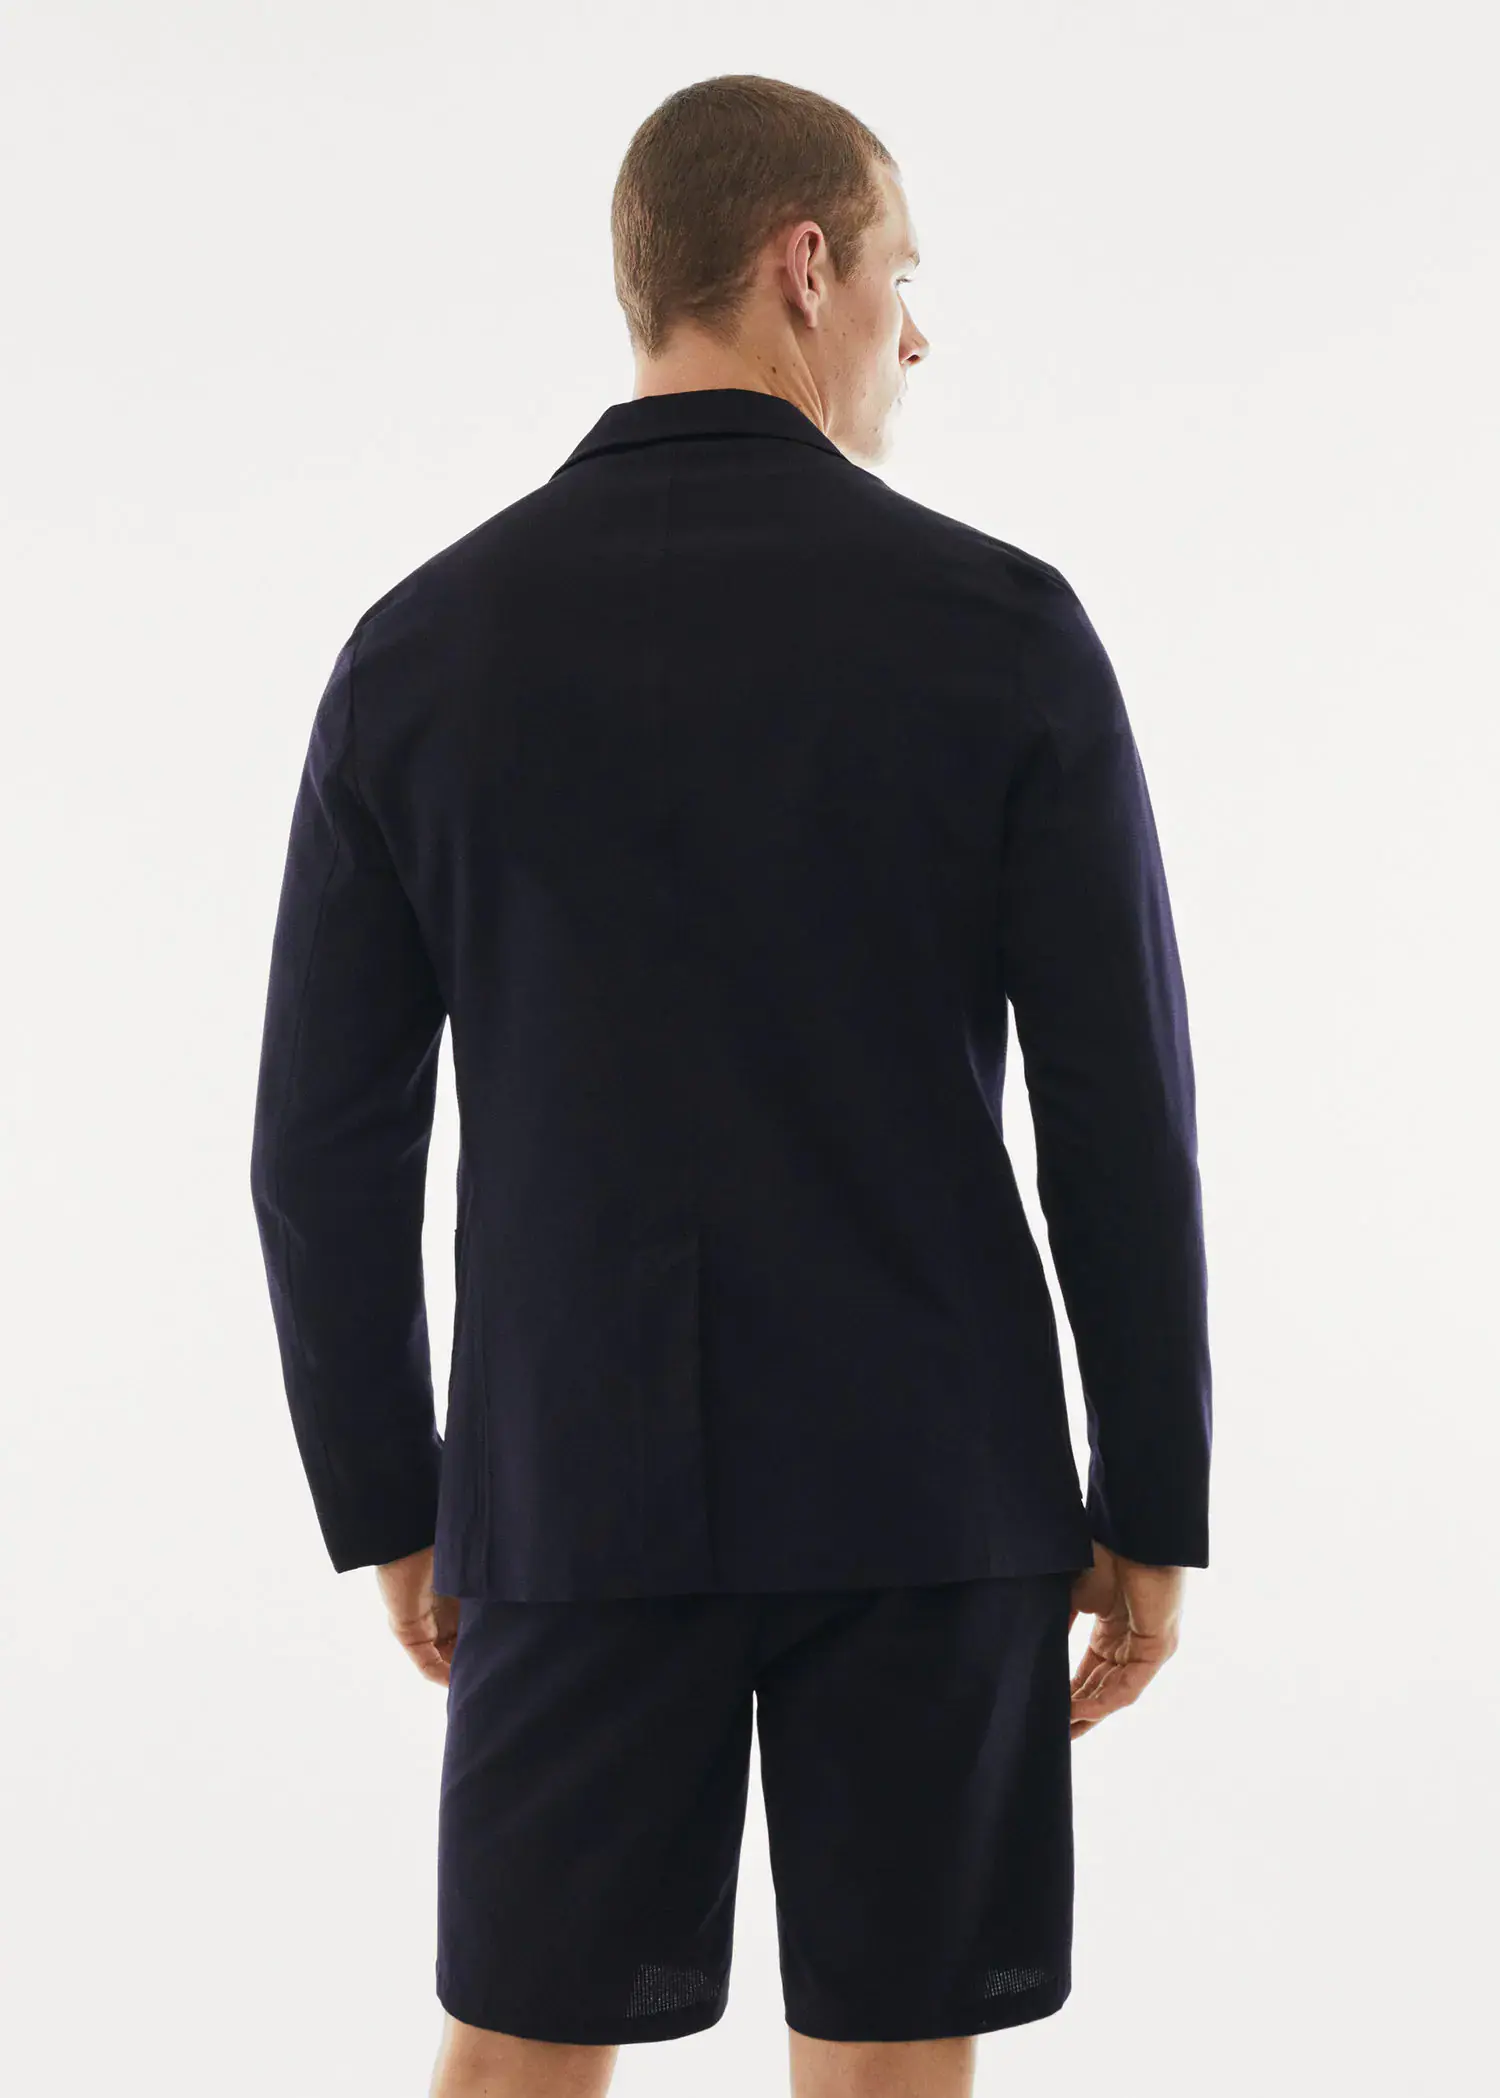 Mango Water-repellent jacket with pockets. a man wearing a black jacket and black pants. 